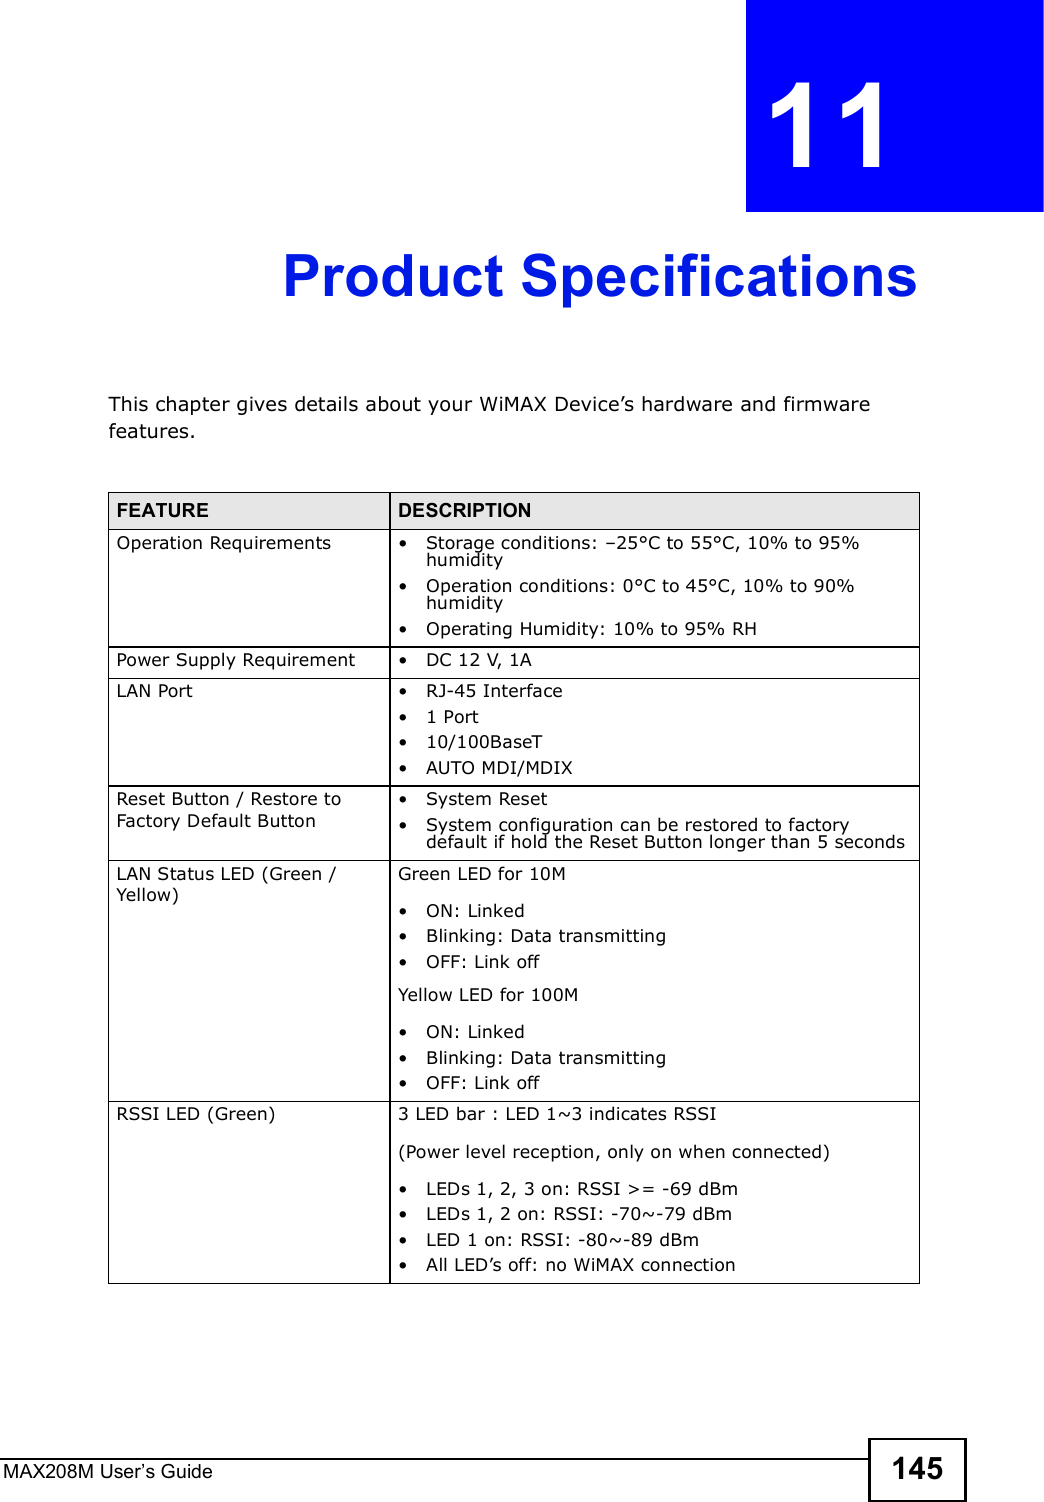 MAX208M User s Guide 145CHAPTER  11 Product SpecificationsThis chapter gives details about your WiMAX Device s hardware and firmware features.FEATURE DESCRIPTIONOperation Requirements !Storage conditions: $25°C to 55°C, 10% to 95% humidity!Operation conditions: 0°C to 45°C, 10% to 90% humidity !Operating Humidity: 10% to 95% RHPower Supply Requirement !DC 12 V, 1A LAN Port !RJ-45 Interface!1 Port!10/100BaseT!AUTO MDI/MDIXReset Button / Restore to Factory Default Button!System Reset!System configuration can be restored to factory default if hold the Reset Button longer than 5 secondsLAN Status LED (Green / Yellow)Green LED for 10M!ON: Linked!Blinking: Data transmitting!OFF: Link offYellow LED for 100M!ON: Linked!Blinking: Data transmitting!OFF: Link offRSSI LED (Green)3 LED bar : LED 1~3 indicates RSSI(Power level reception, only on when connected) !LEDs 1, 2, 3 on: RSSI &gt;= -69 dBm!LEDs 1, 2 on: RSSI: -70~-79 dBm!LED 1 on: RSSI: -80~-89 dBm!All LED s off: no WiMAX connection